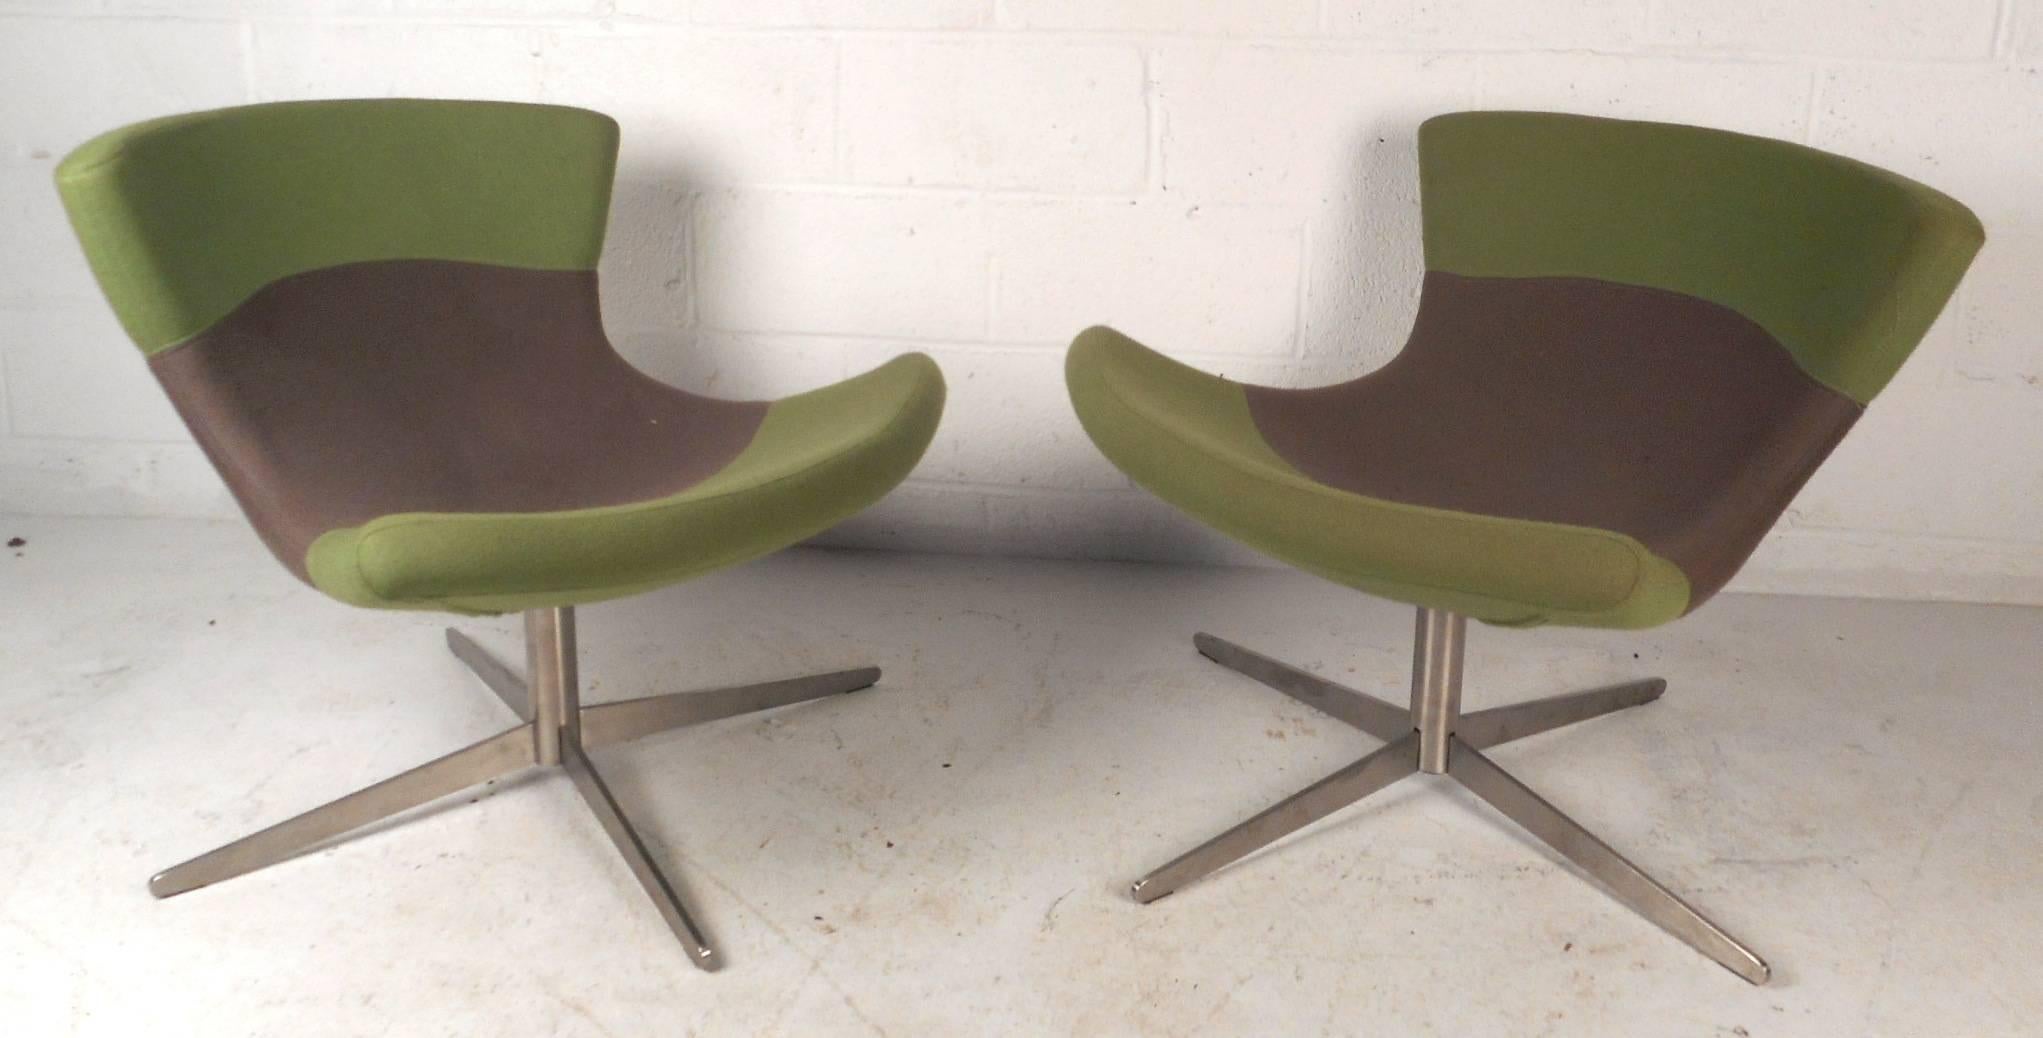 This beautiful pair of vintage modern lounge chairs feature sculpted seating with a winged backrest. Sleek design with colorful plush upholstery and a heavy chrome swivel base. Unique chairs with the perfect contours and thick padded seating to